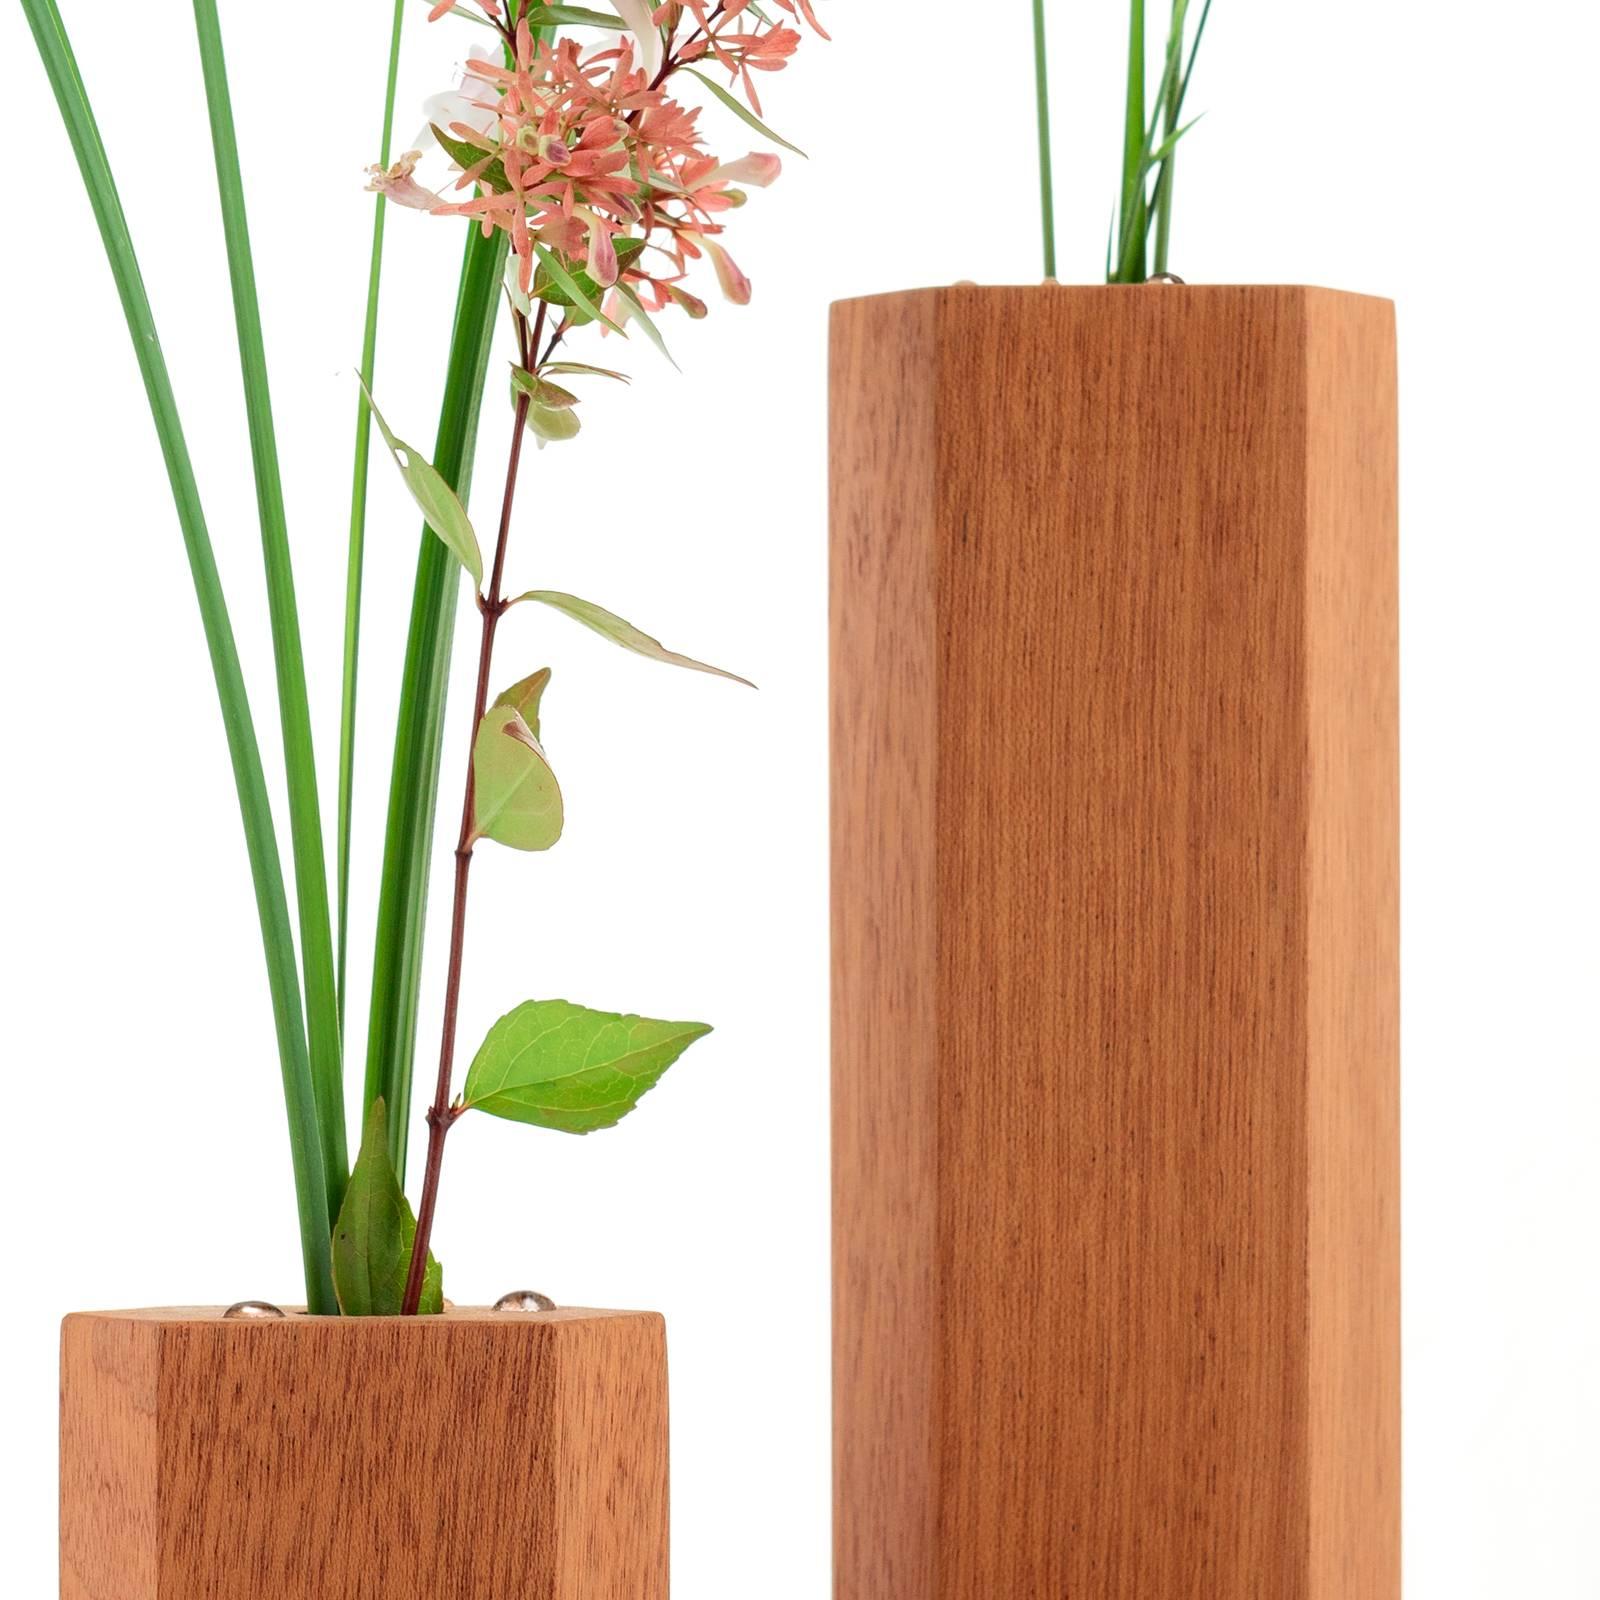 French Bloc Contemporary Geometric Wood Single-Bud Vase Set of Tree For Sale